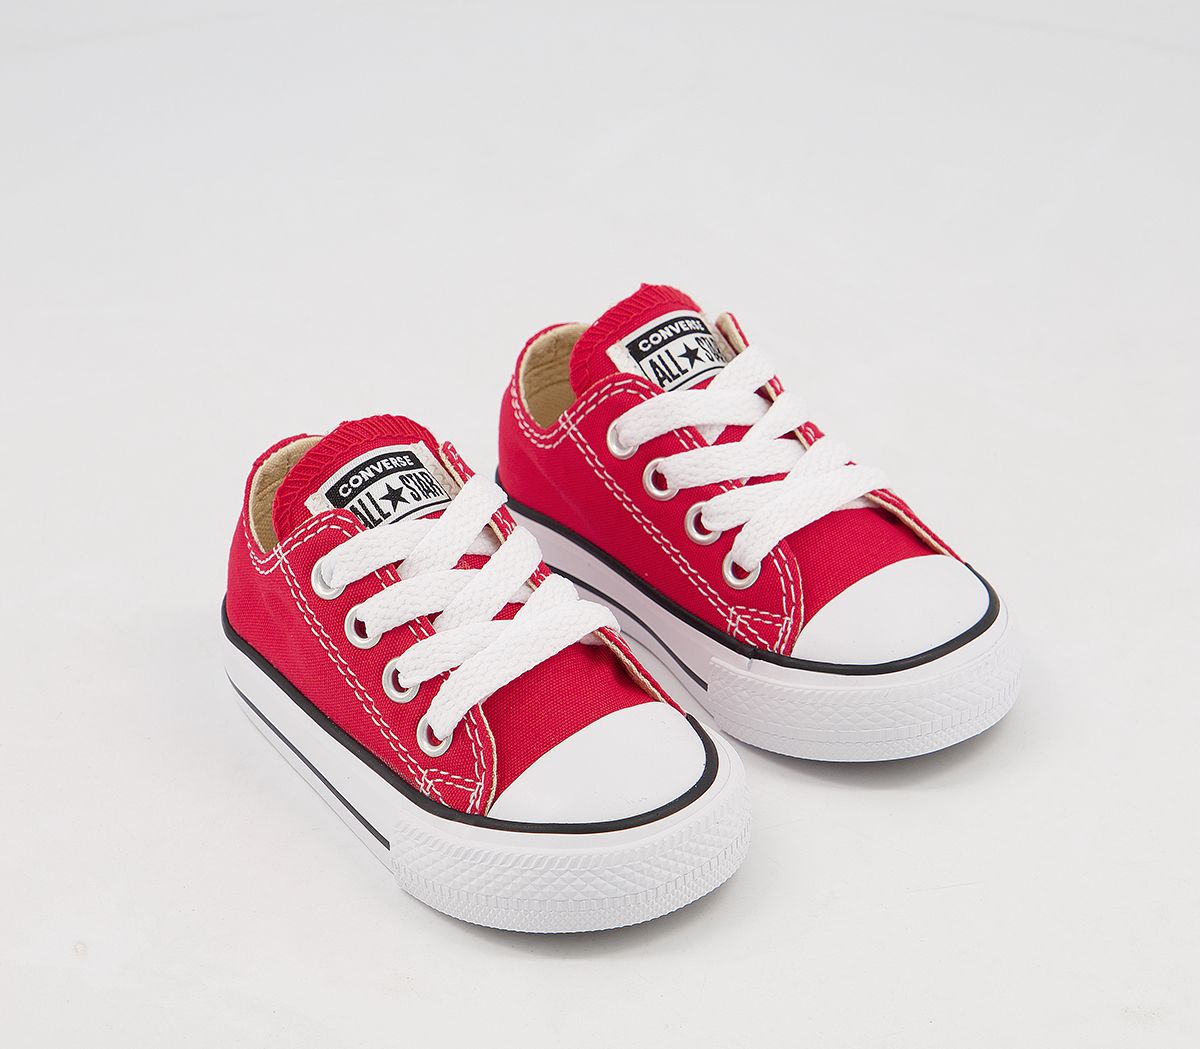 Converse All Star Low Infant Shoes Red - Unisex